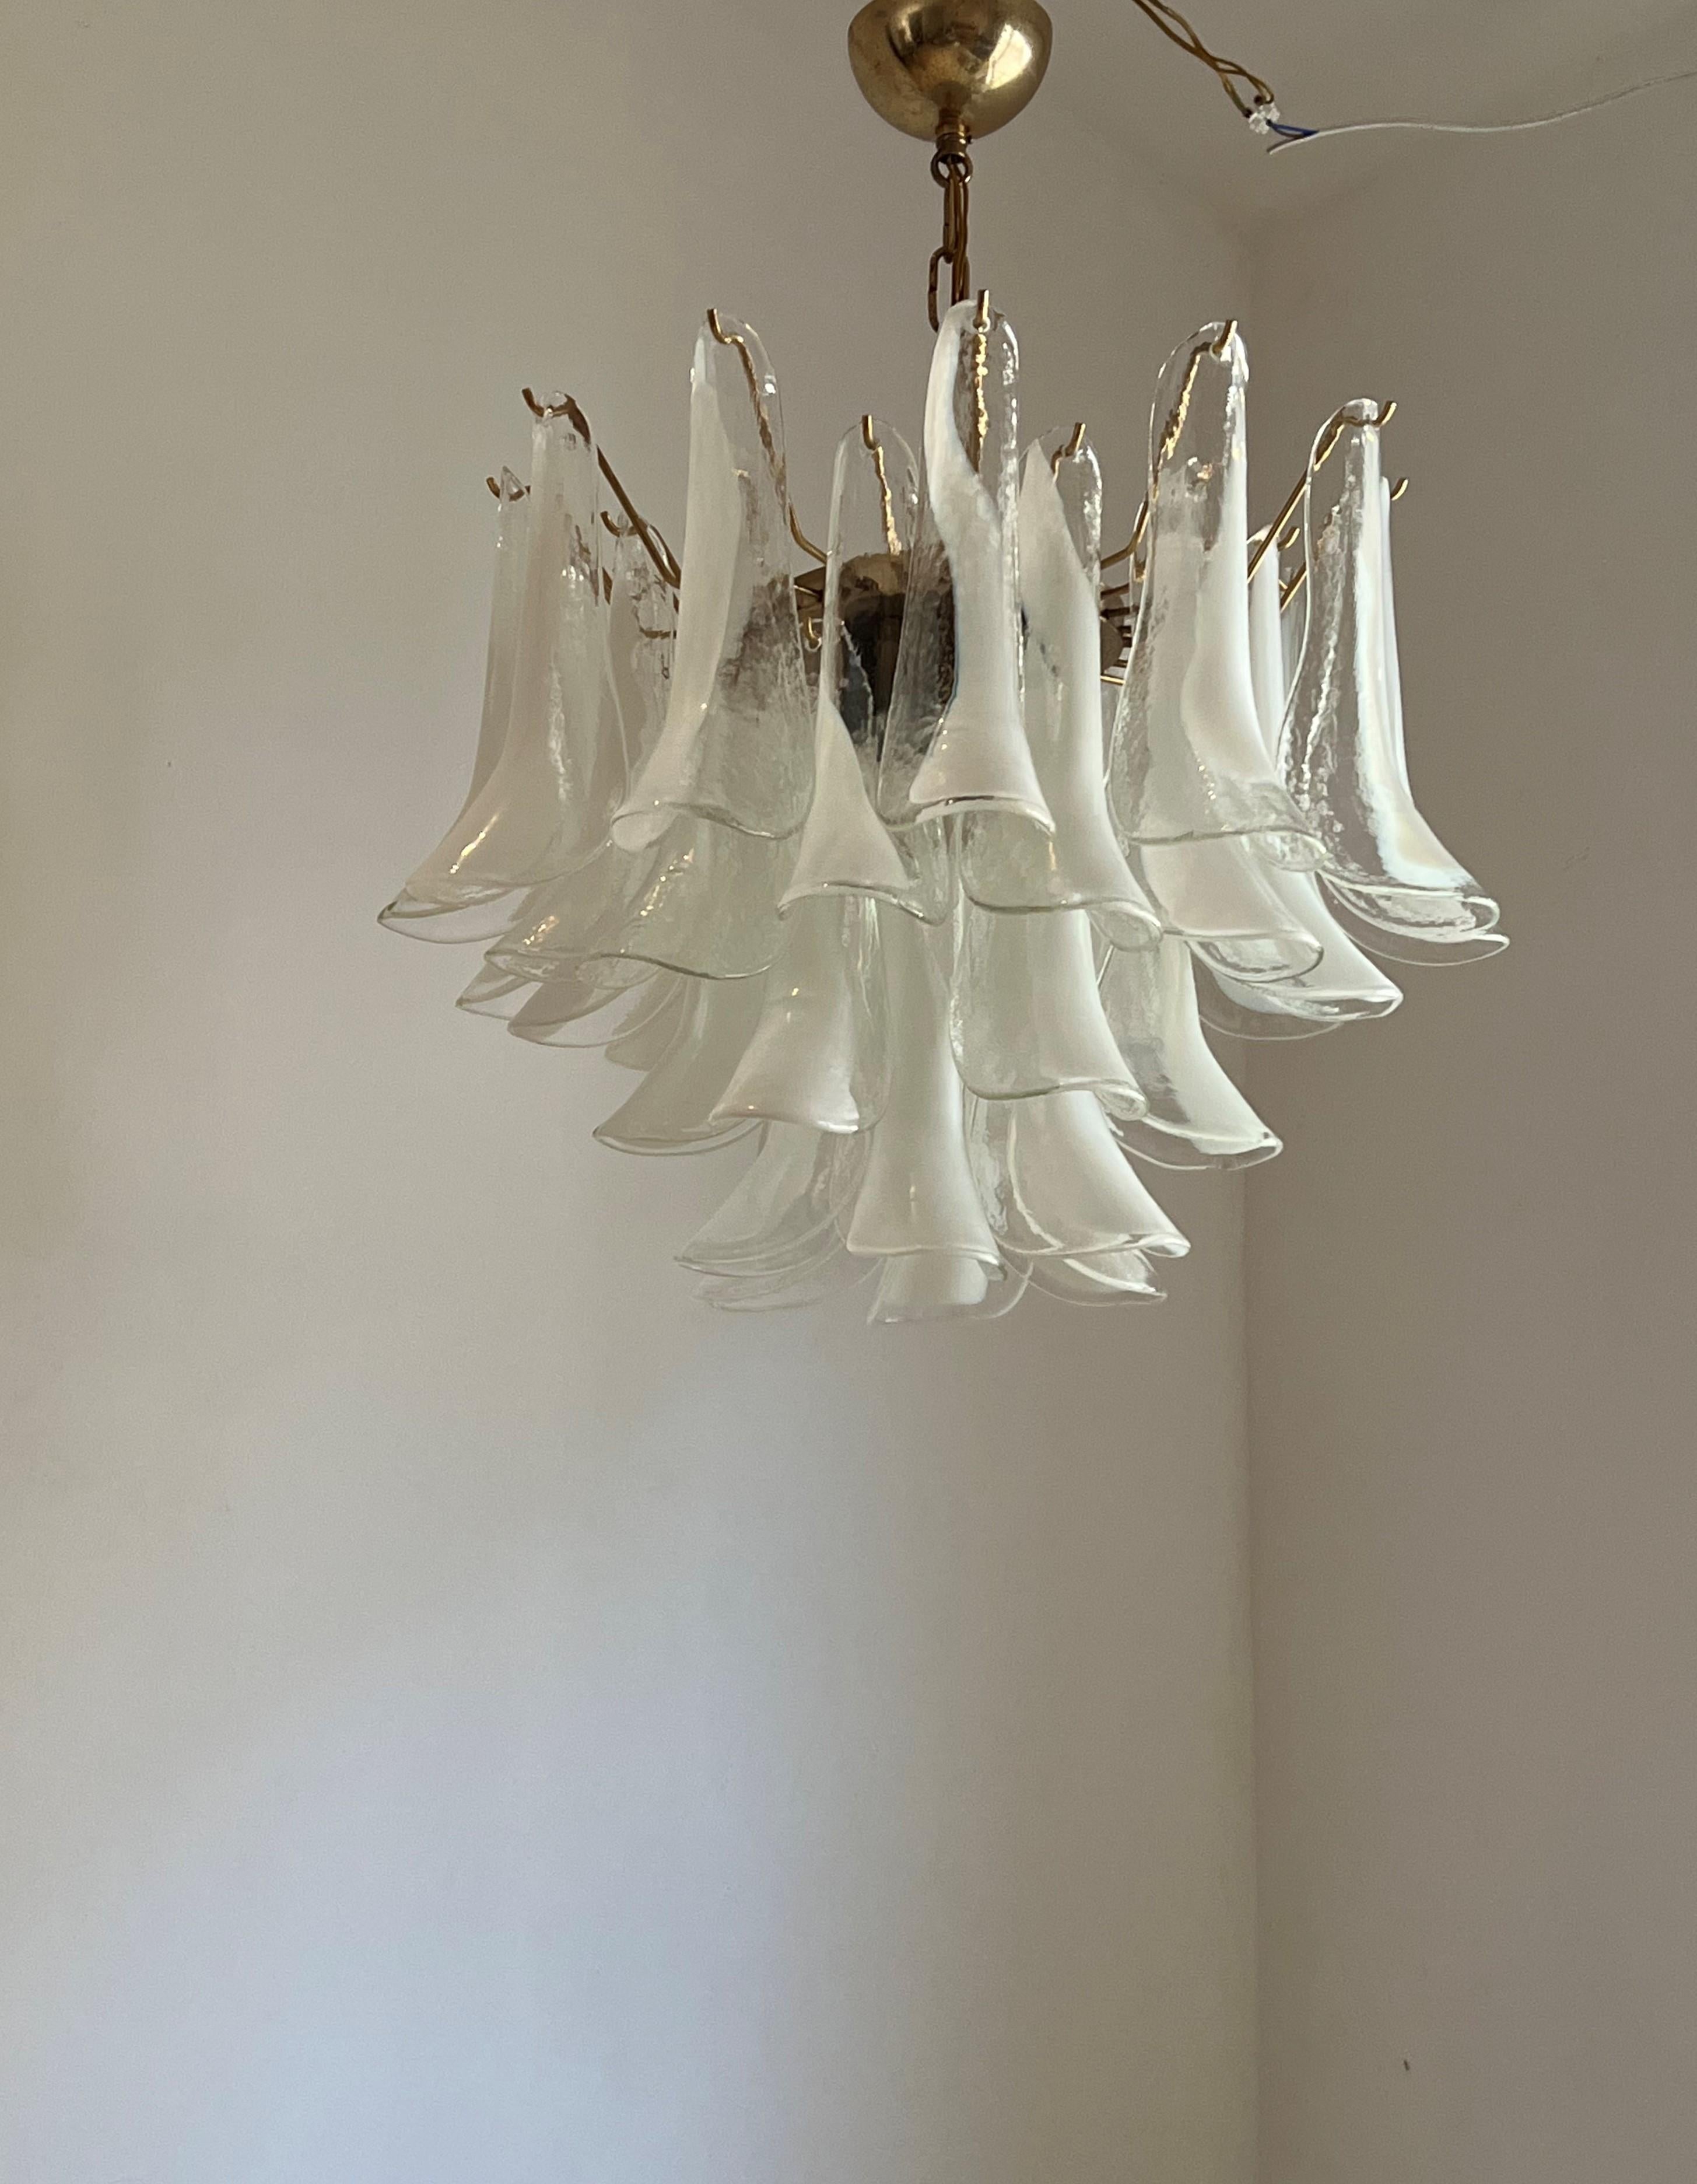 Two Identical Signed Mid-Century Modern Chandeliers, La Murrina in Murano Glass For Sale 2